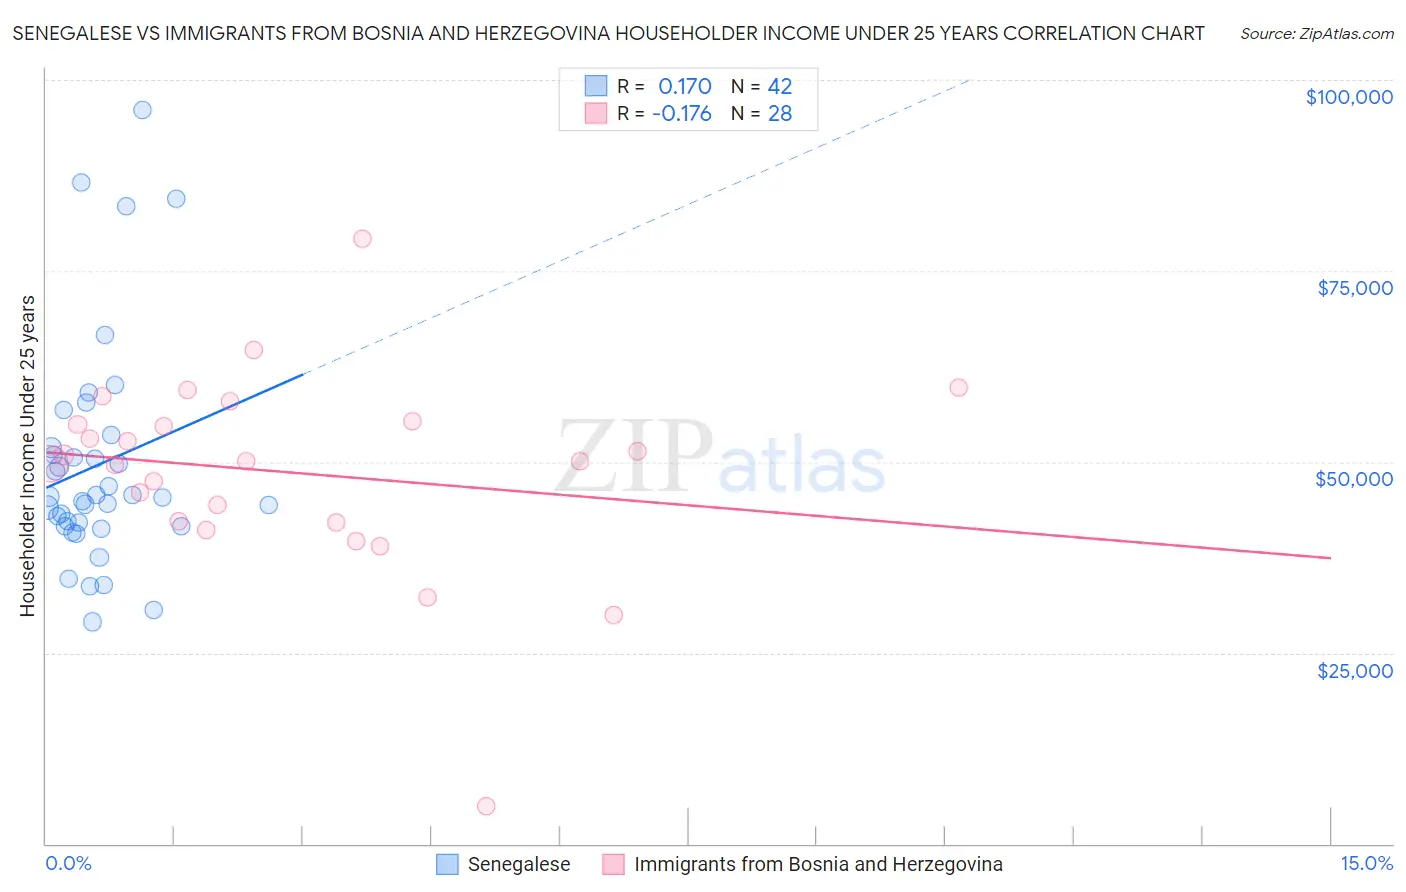 Senegalese vs Immigrants from Bosnia and Herzegovina Householder Income Under 25 years